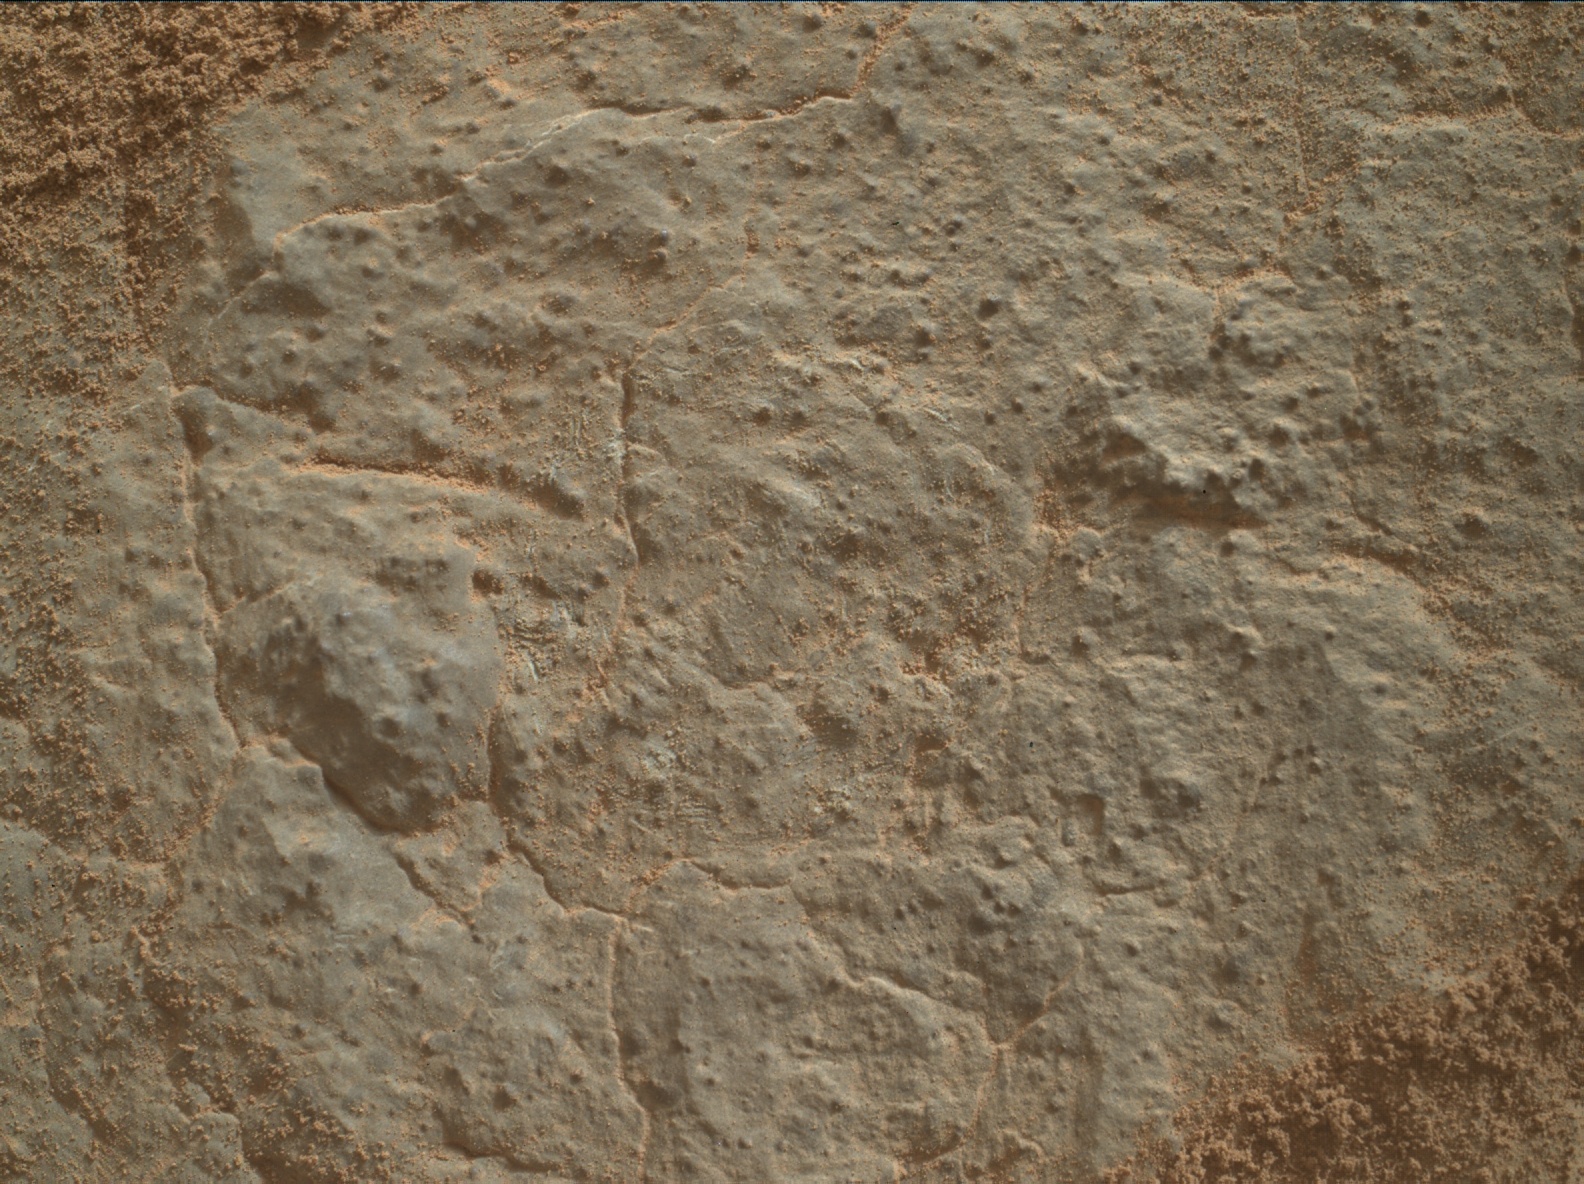 Nasa's Mars rover Curiosity acquired this image using its Mars Hand Lens Imager (MAHLI) on Sol 3453